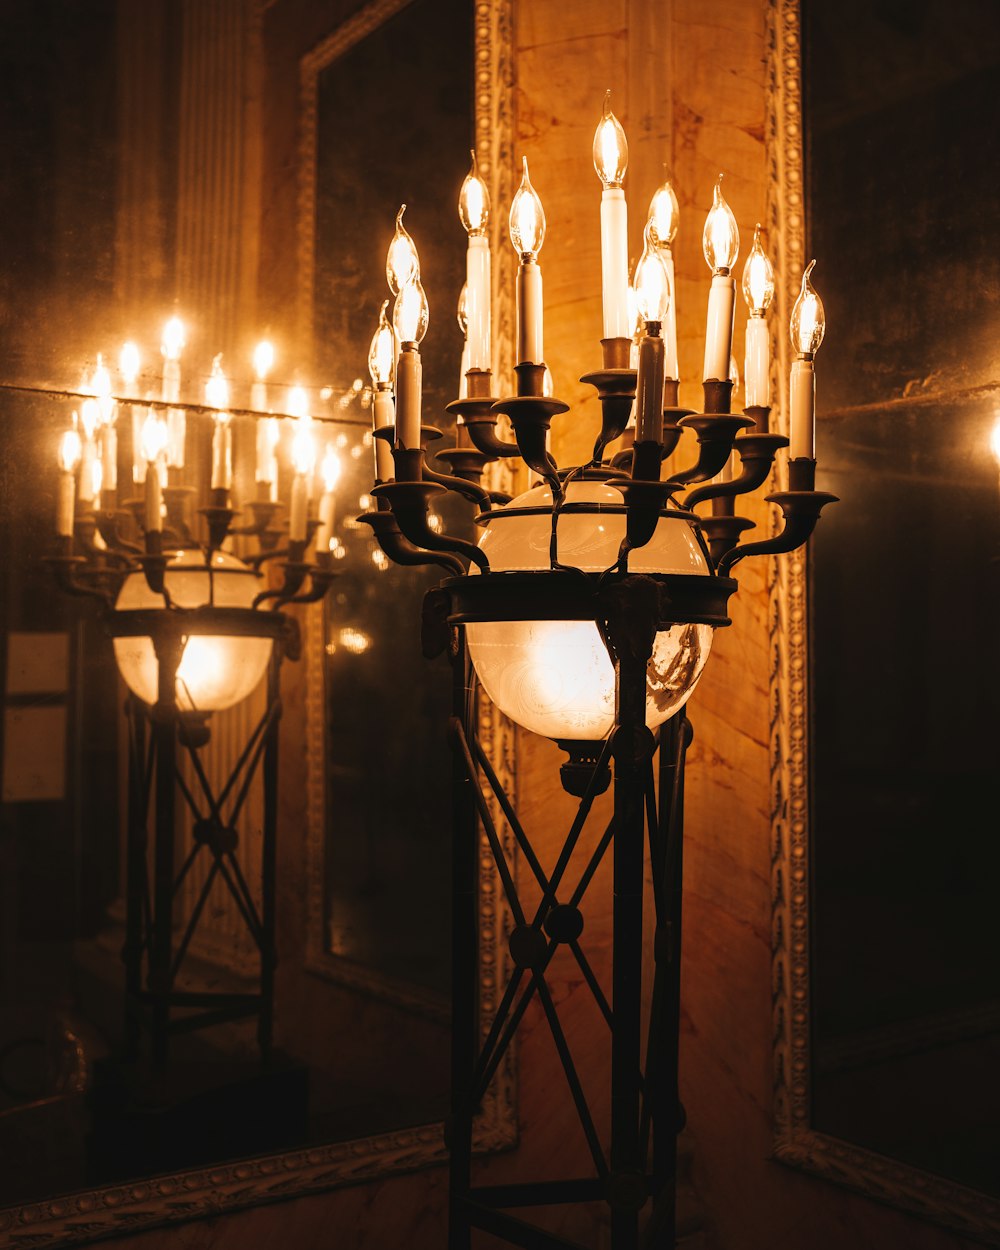 a chandelier with many lit candles in a room